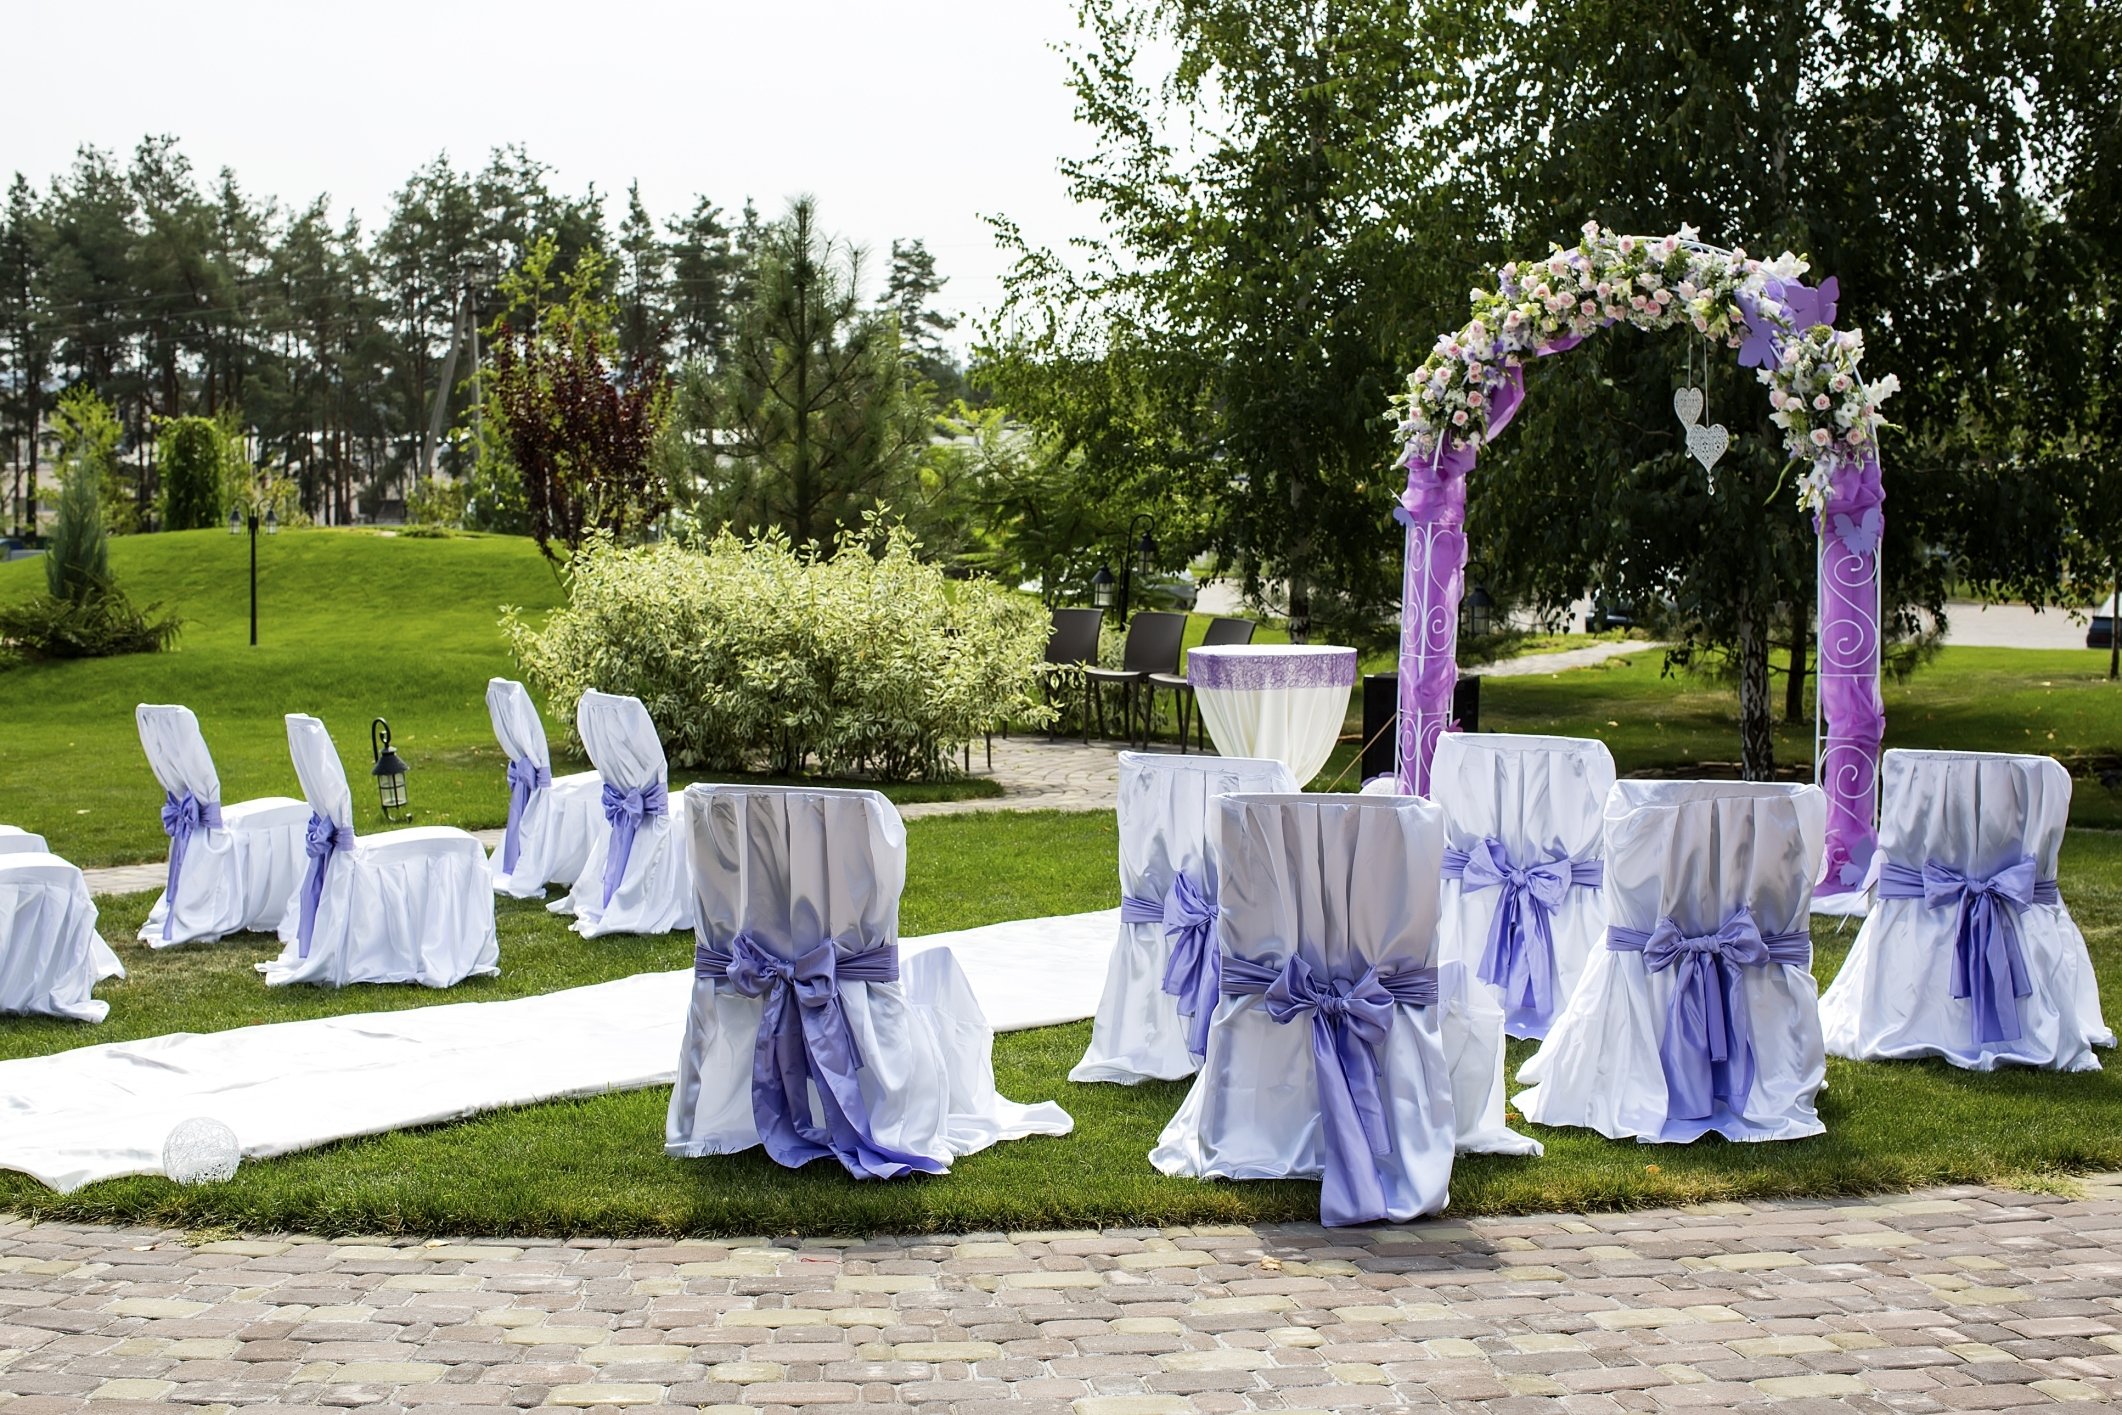 10 Attractive Small Wedding Ideas For Summer the pros and cons of small wedding venues easy weddings uk 50th 2 2022